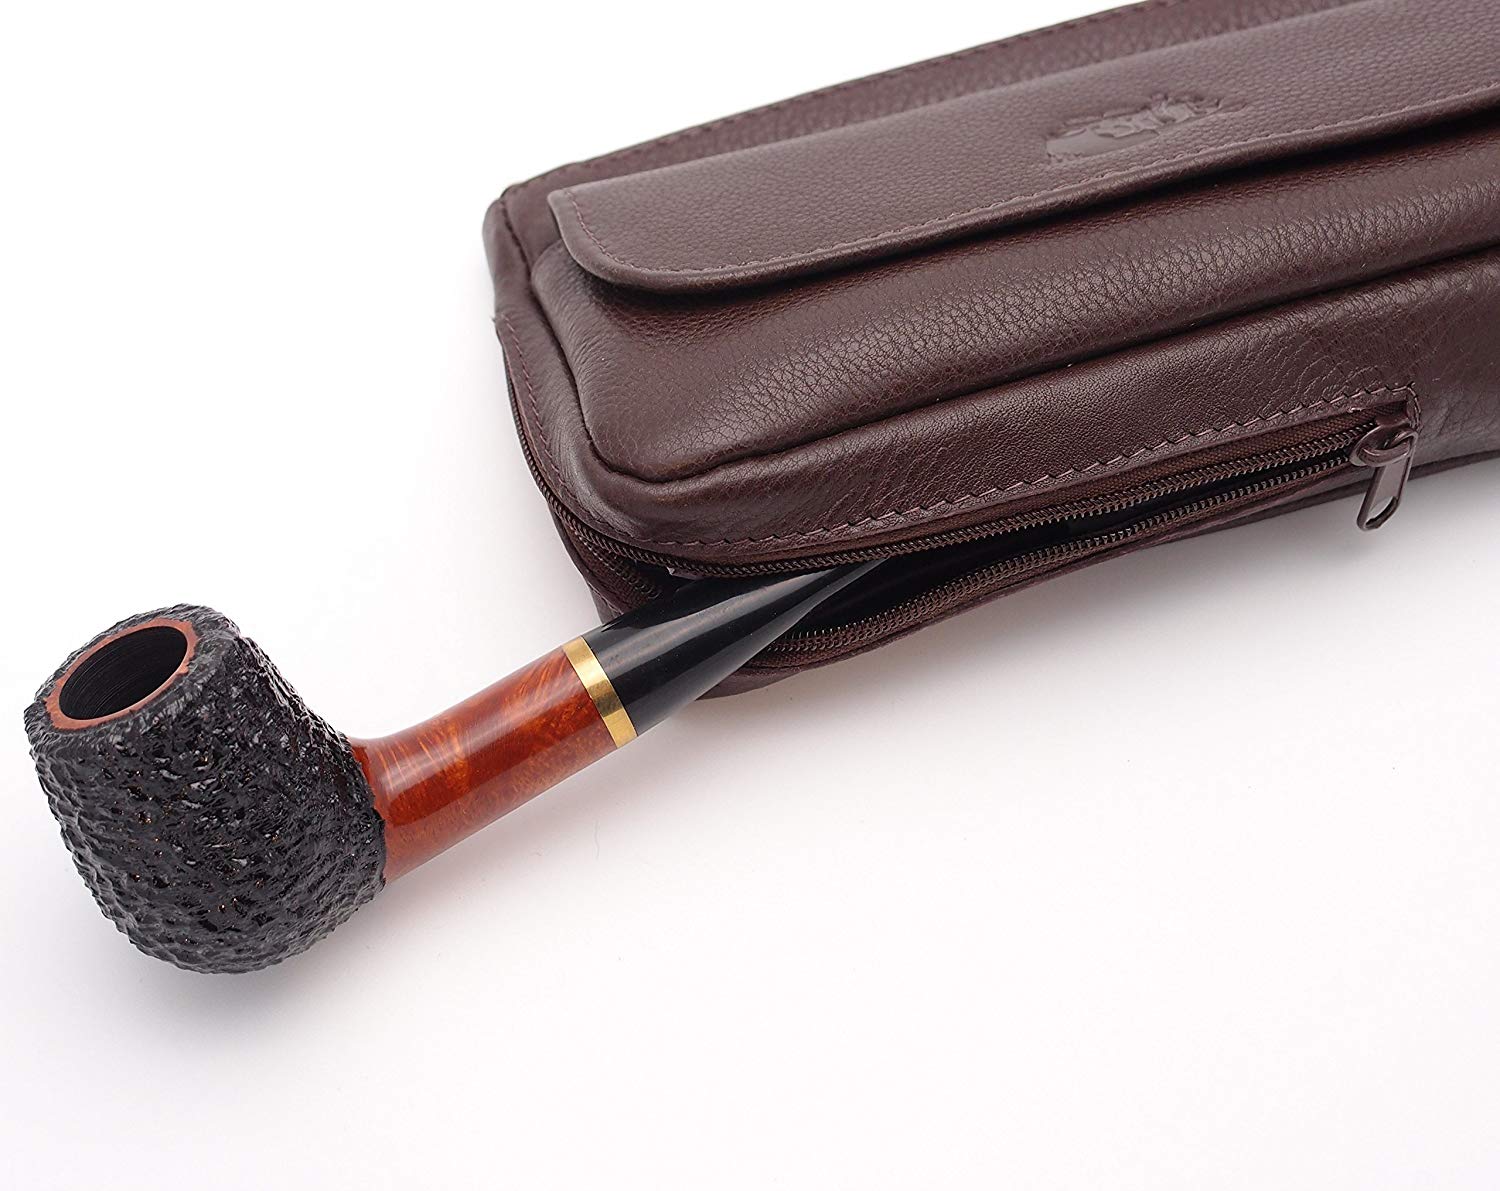 Pipe Tobacco Leather Pouch Combo - Authentic Full Grade Leather